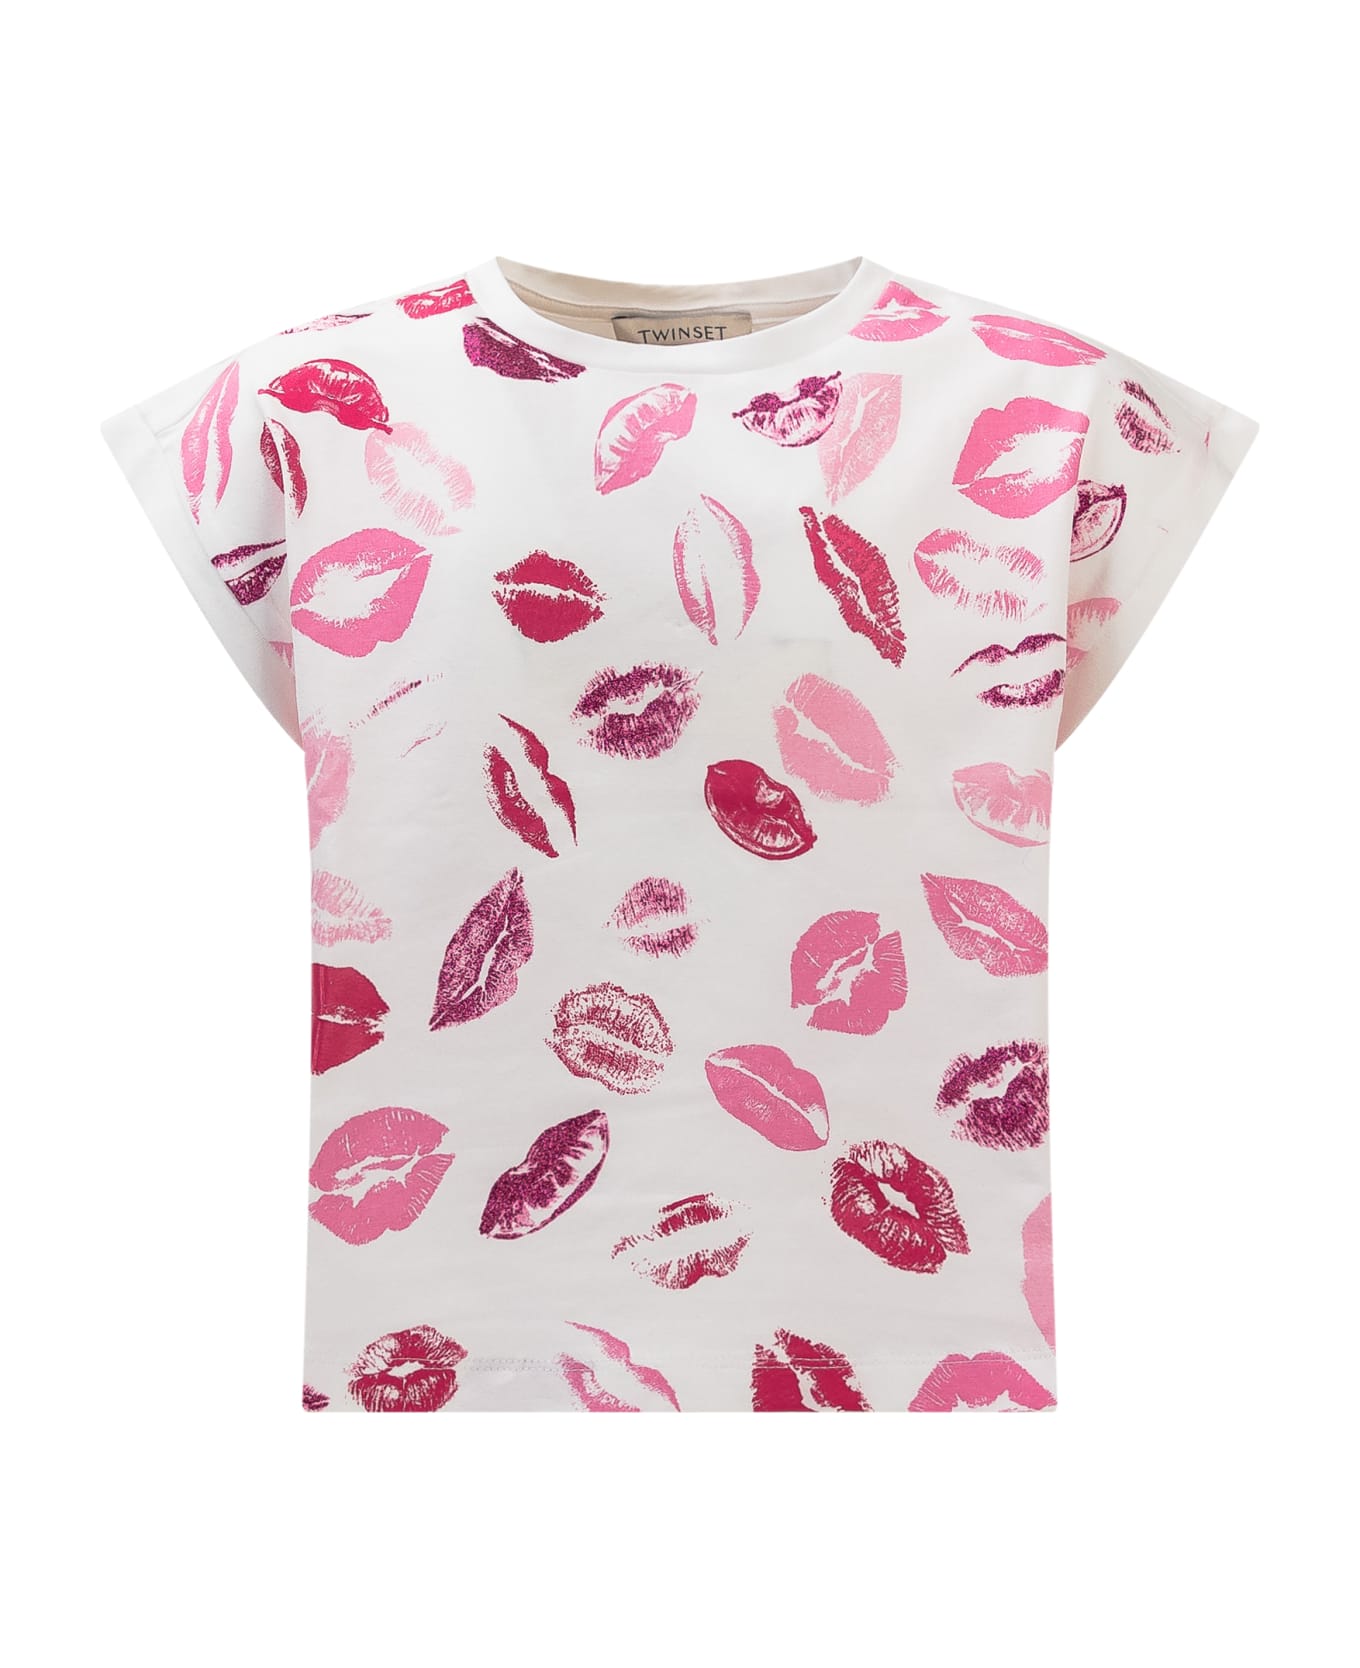 TwinSet Kiss T-shirt - KISS ALL OVER